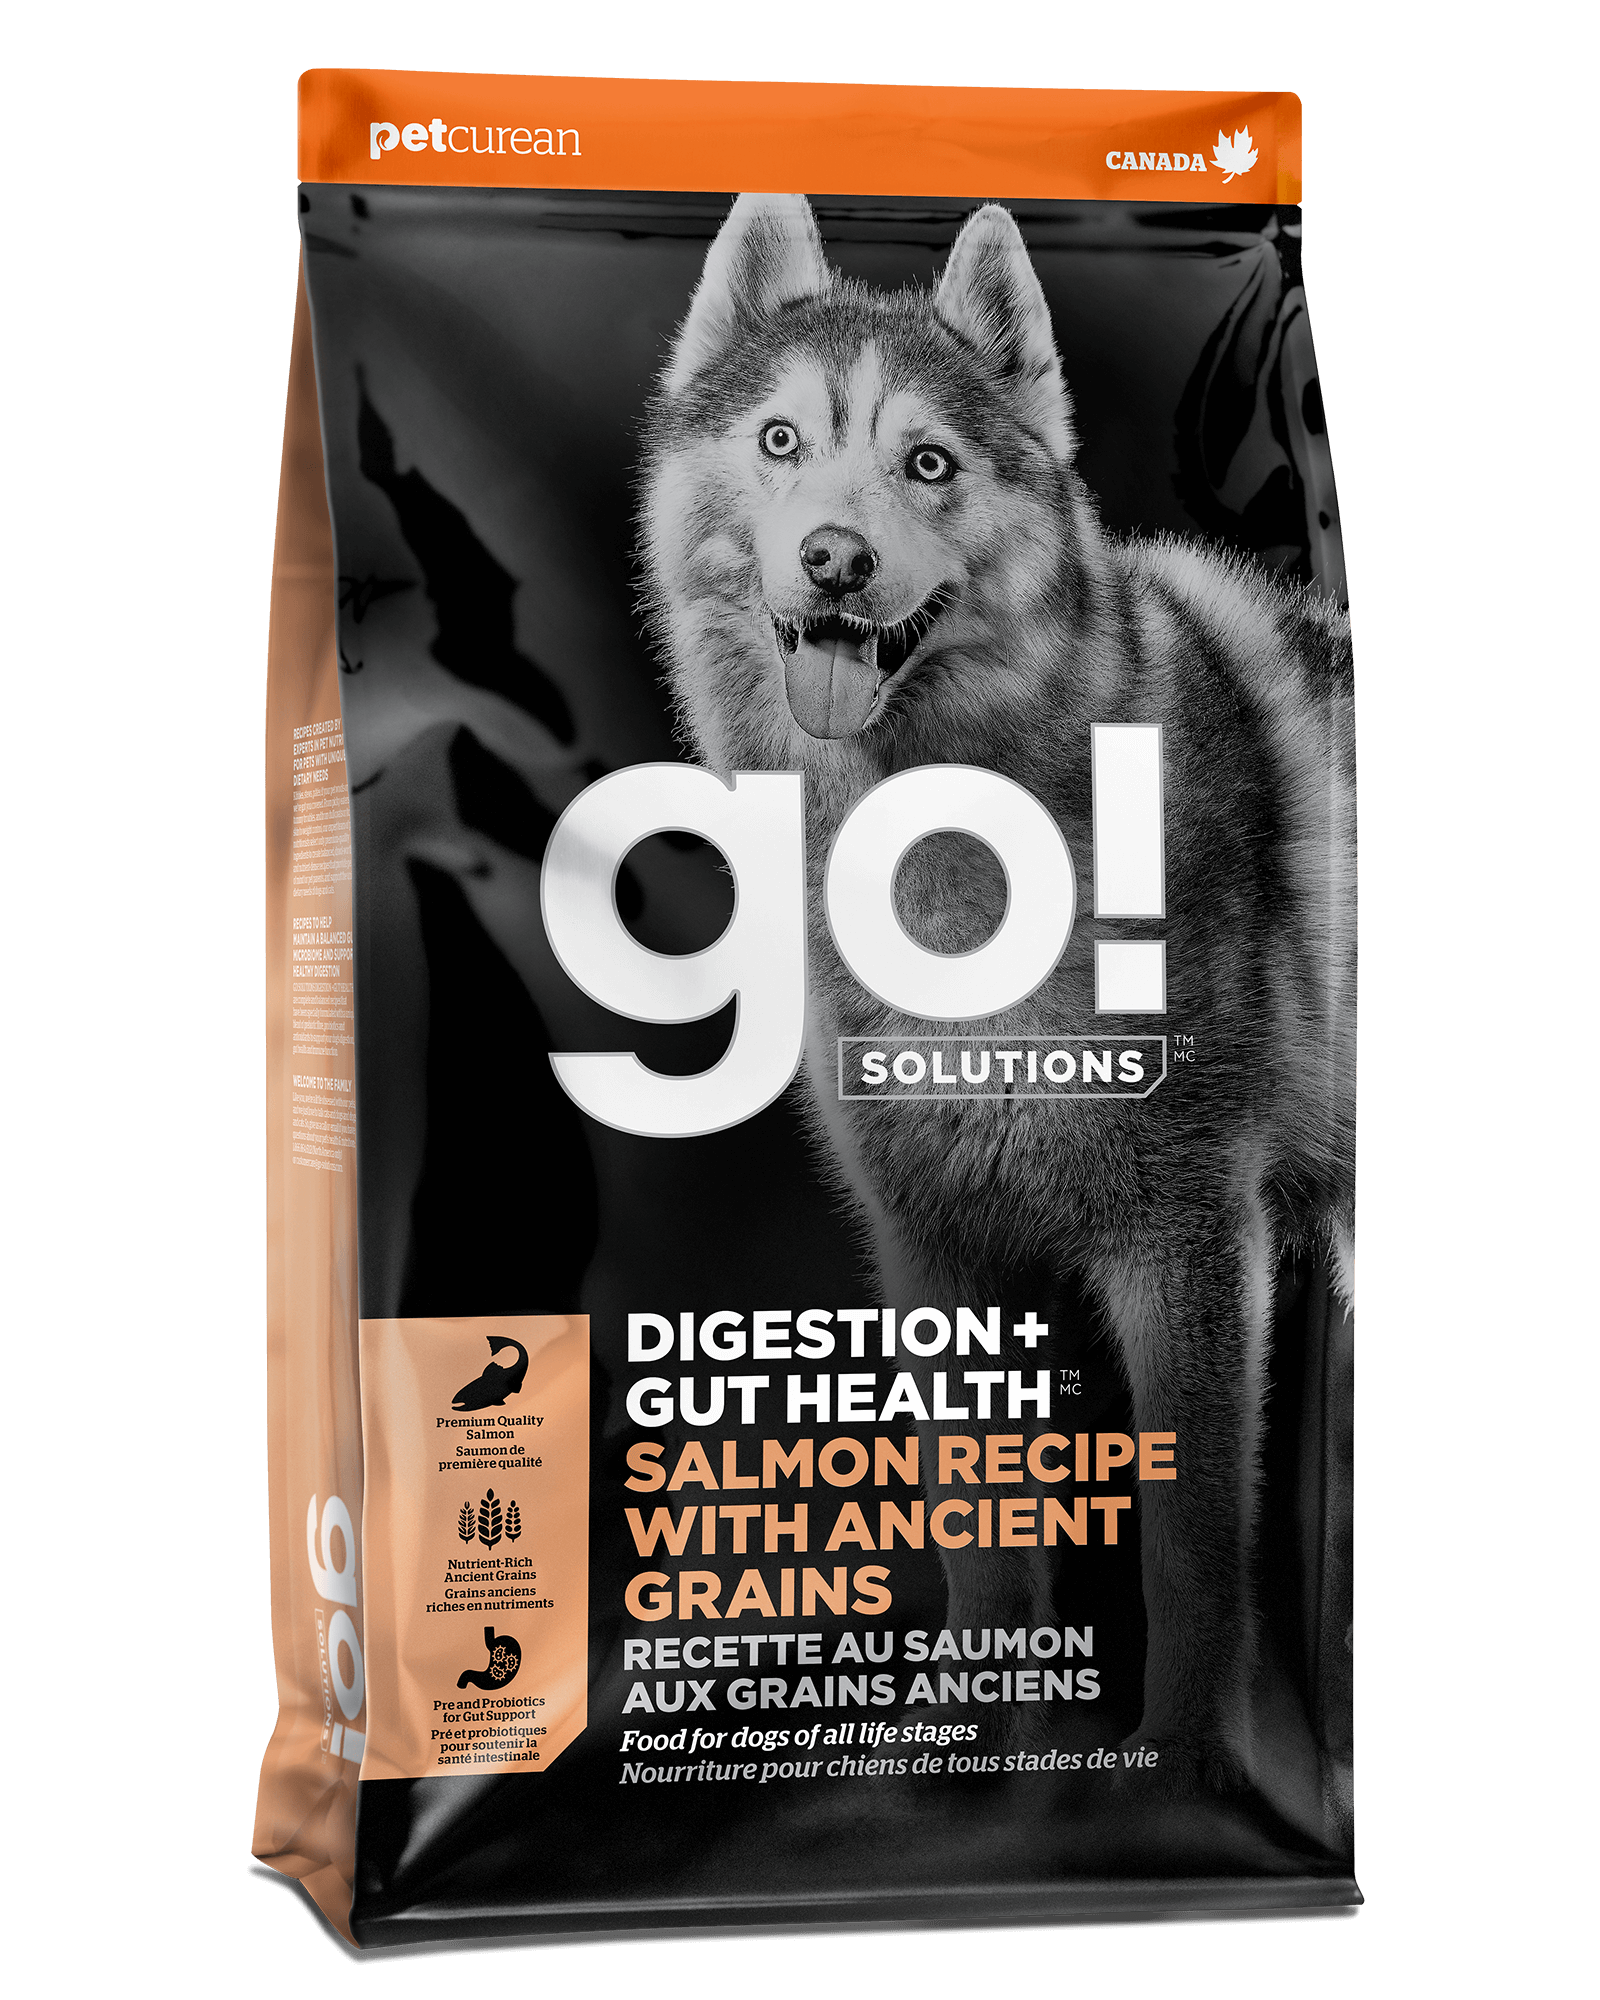 Petcurean GO! Solutions Digestion + Gut Health Salmon with Ancient Grains Recipe Dry Dog Food